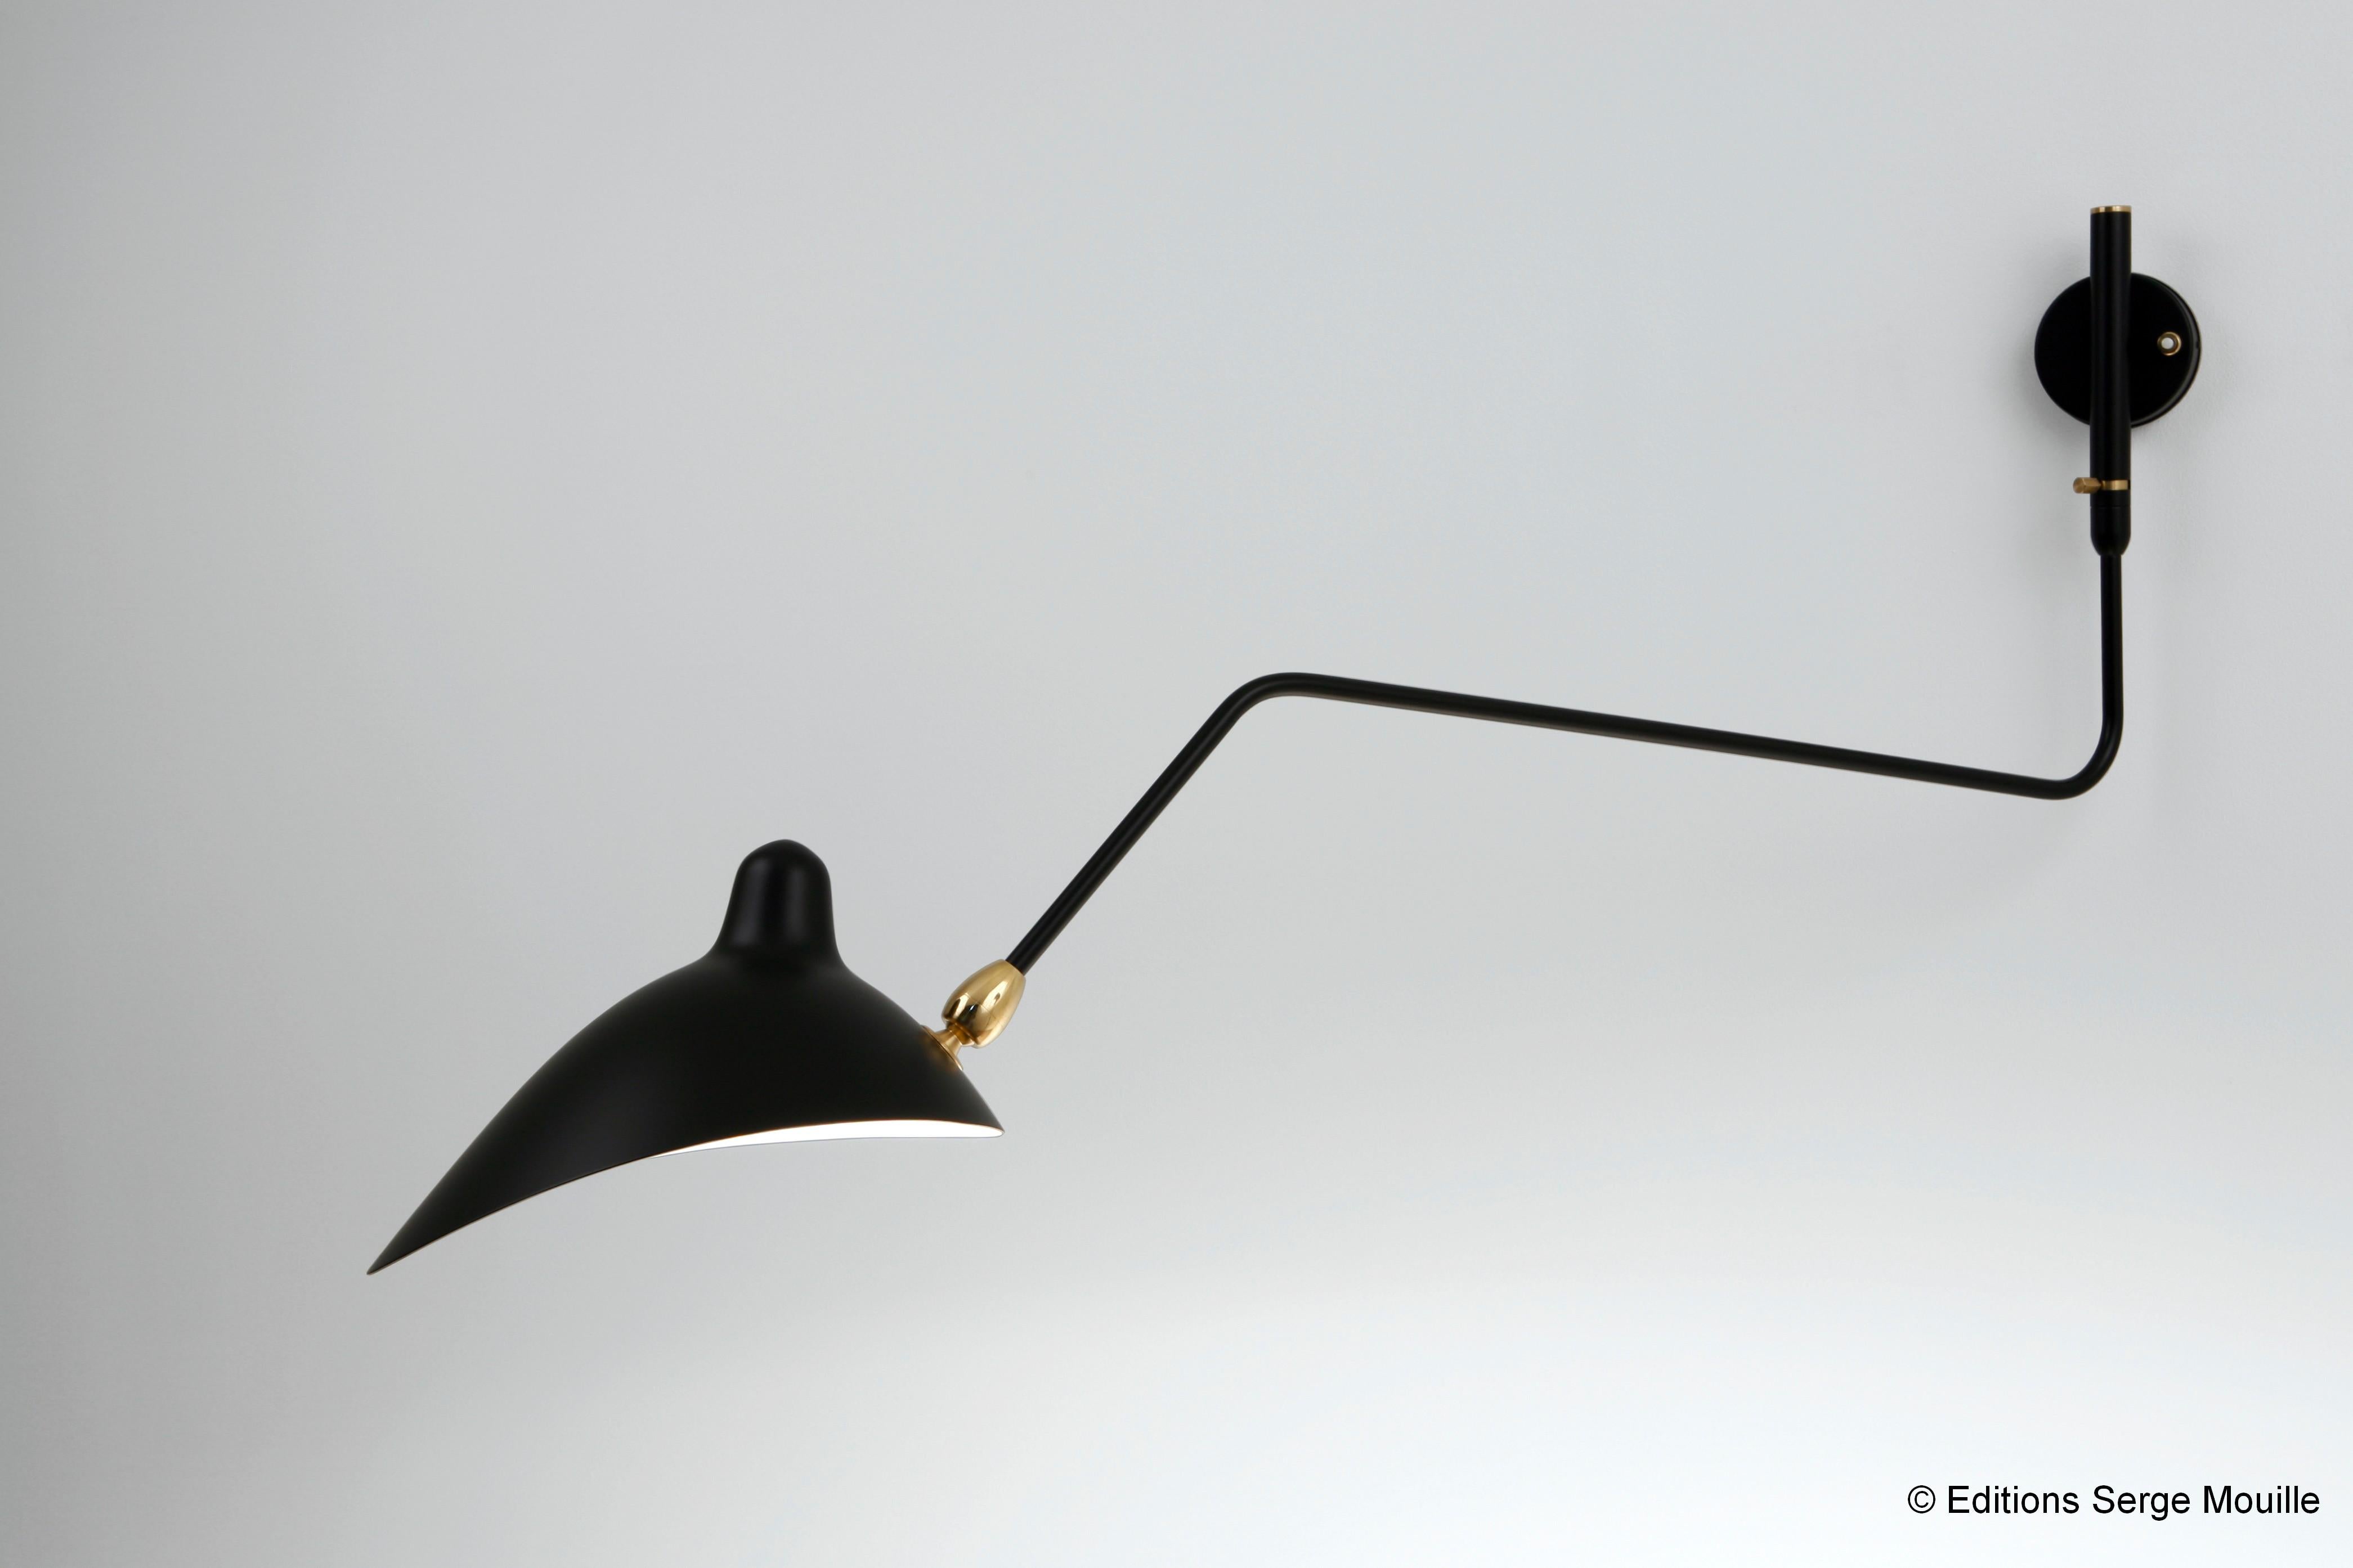 Sconce 1 Rotating Curved Arm by Serge Mouille
Dimensions: D99 x H40 cm
Materials: Brass, Steel, Aluminium
One of a King. Numbered.
Also available in different colour. Please contact us.

All our lamps can be wired according to each country. If sold